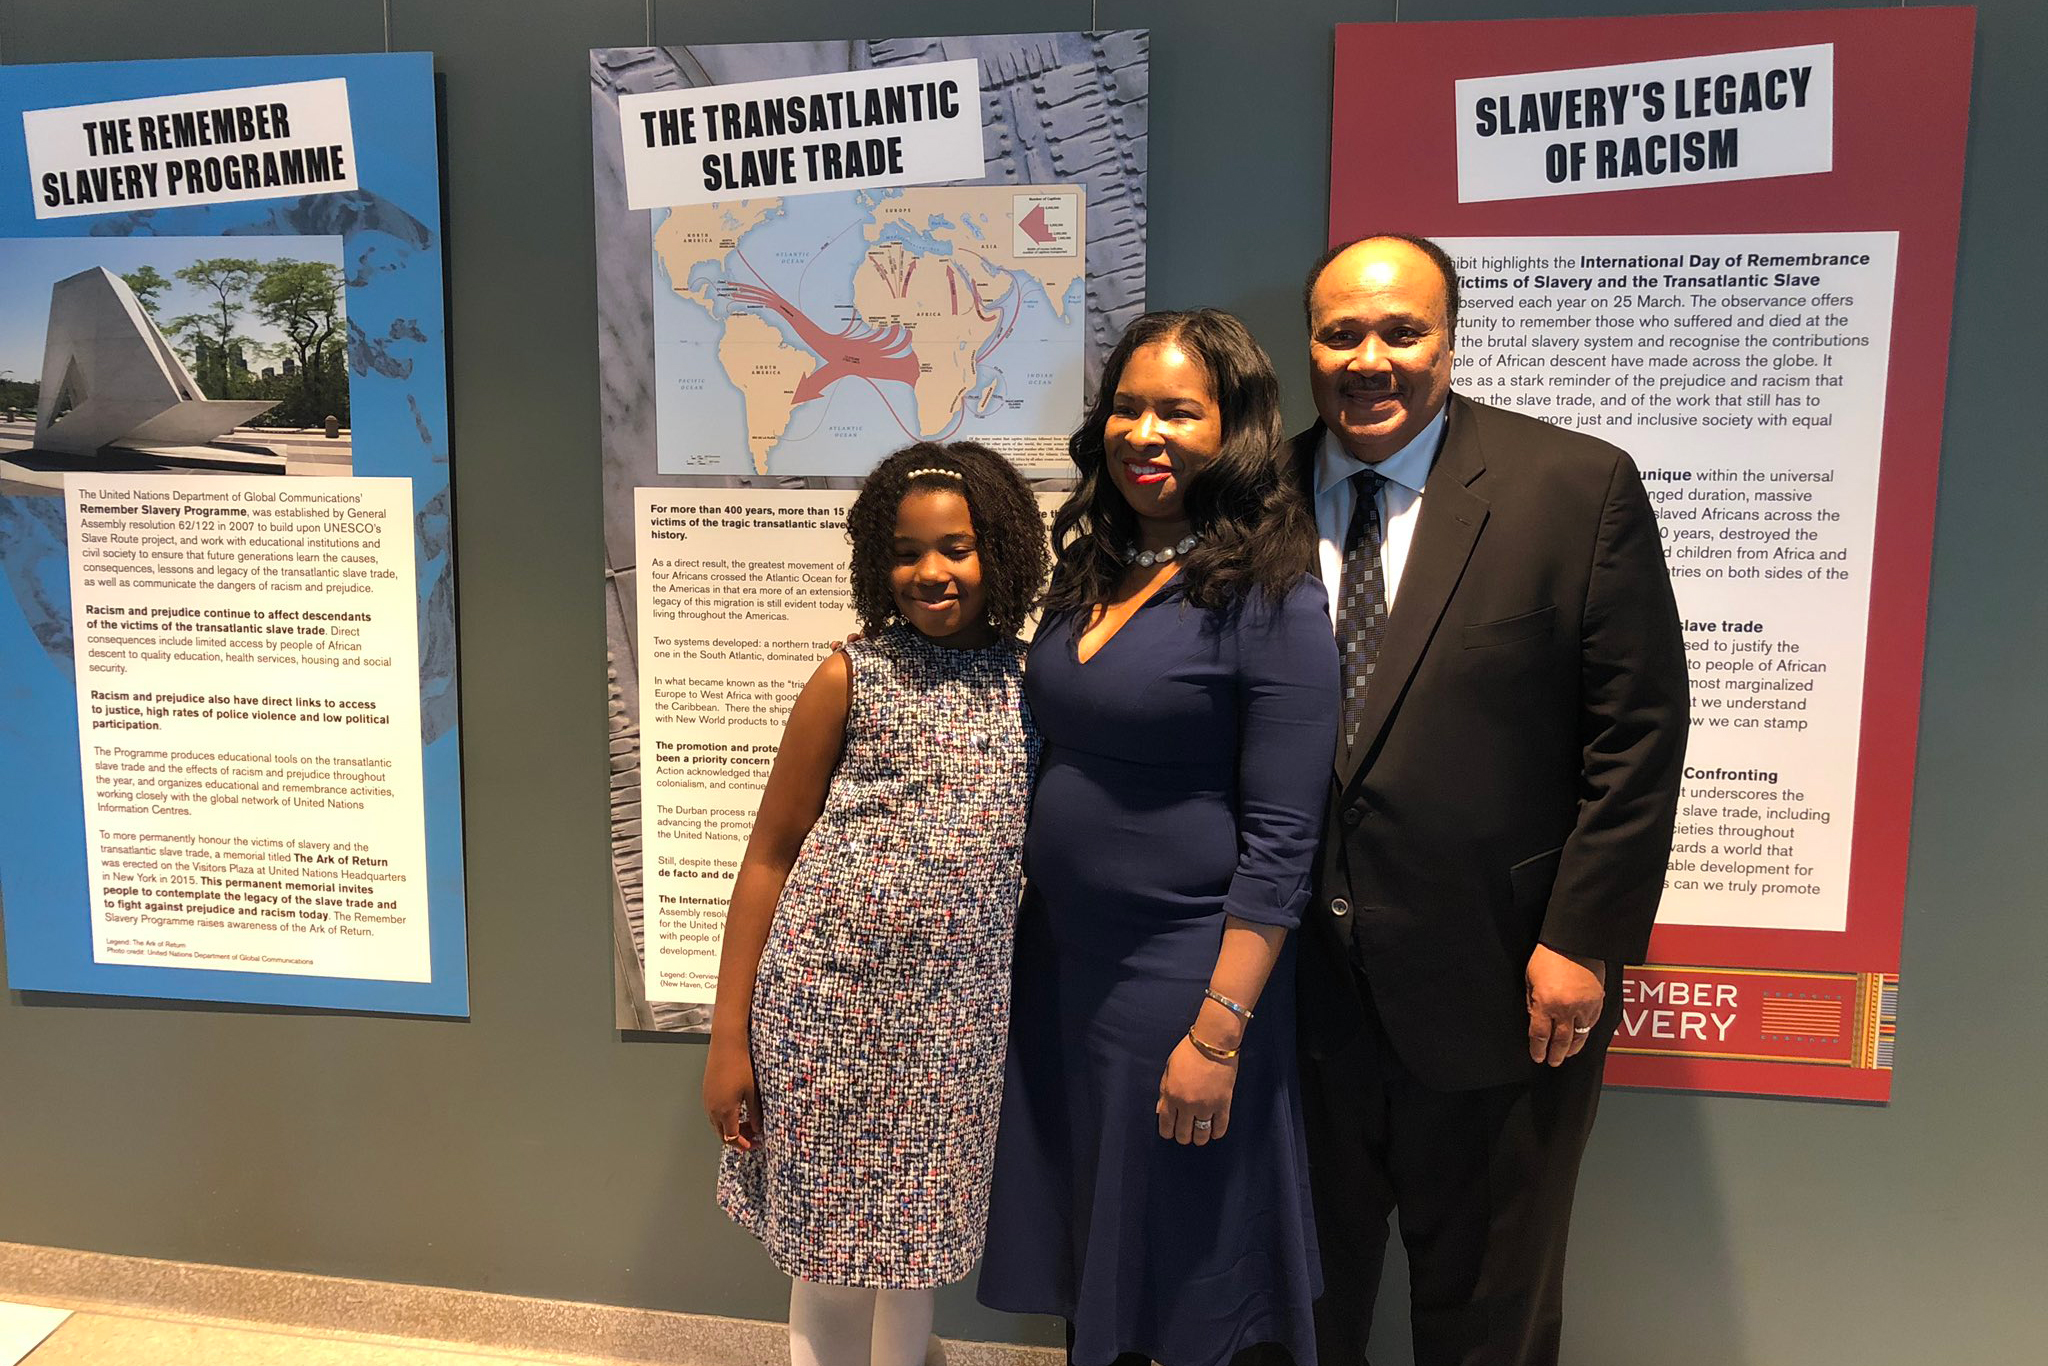 Martin Luther King III with his wife, Arndrea Waters King, and daughter, Yolanda Renee